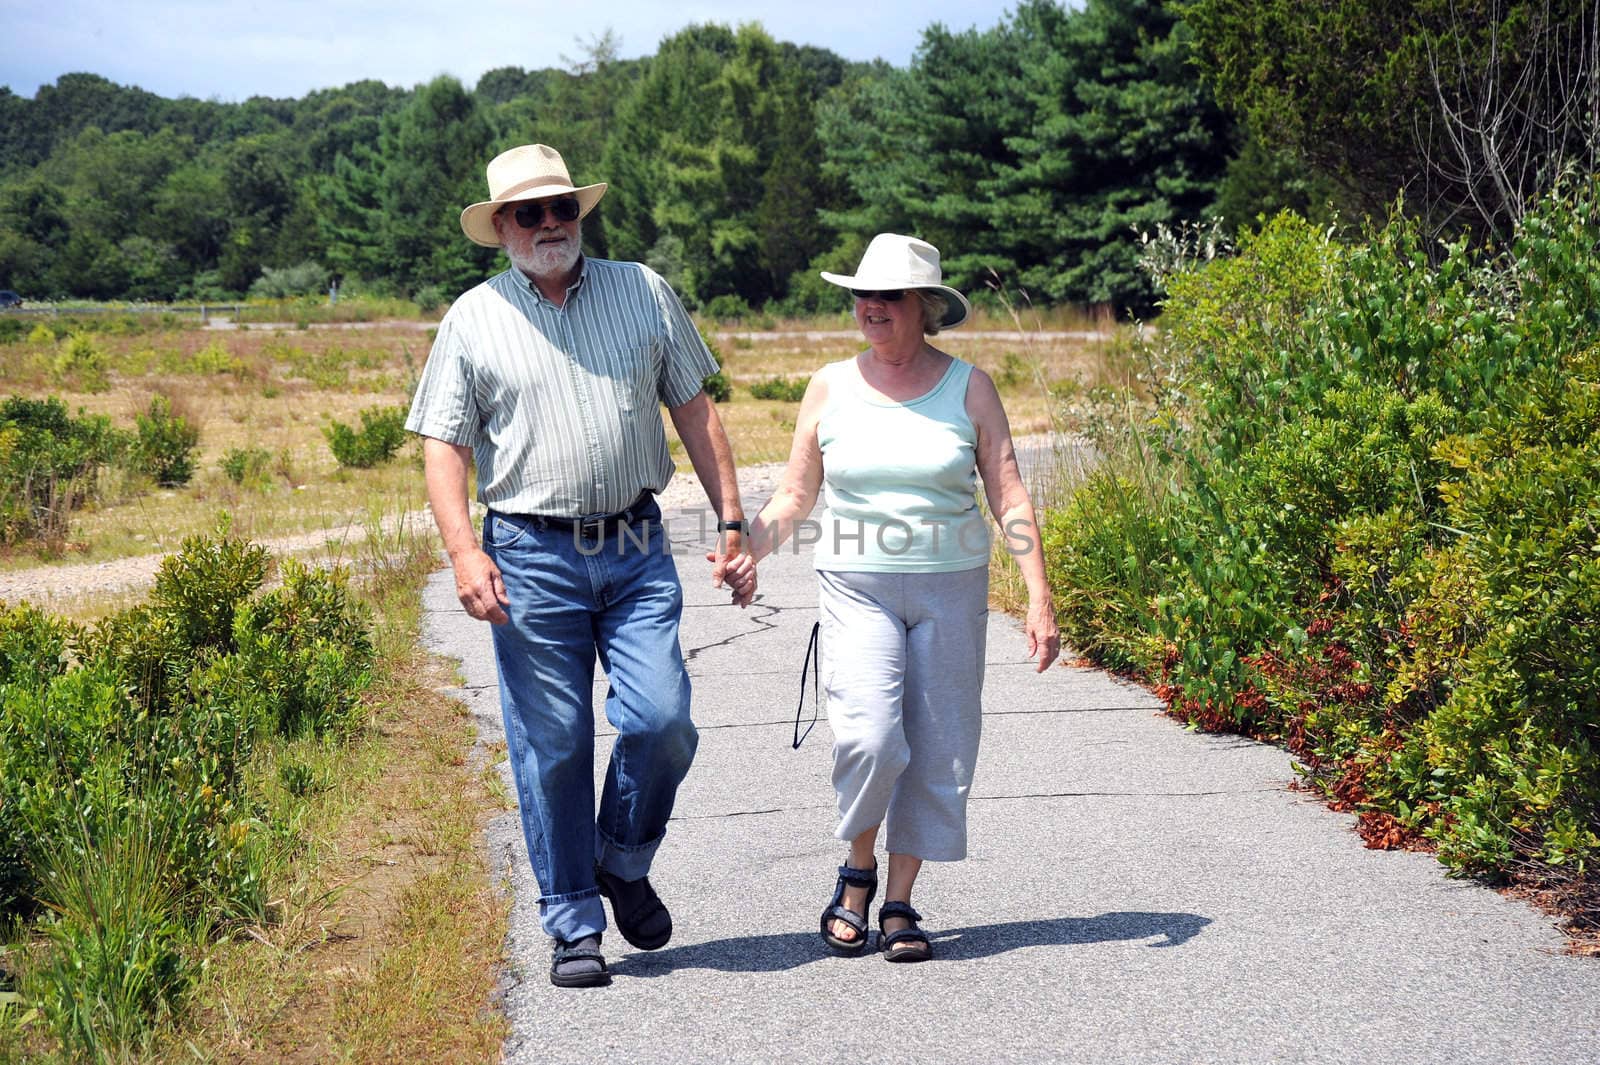 Couple on a walking trail.